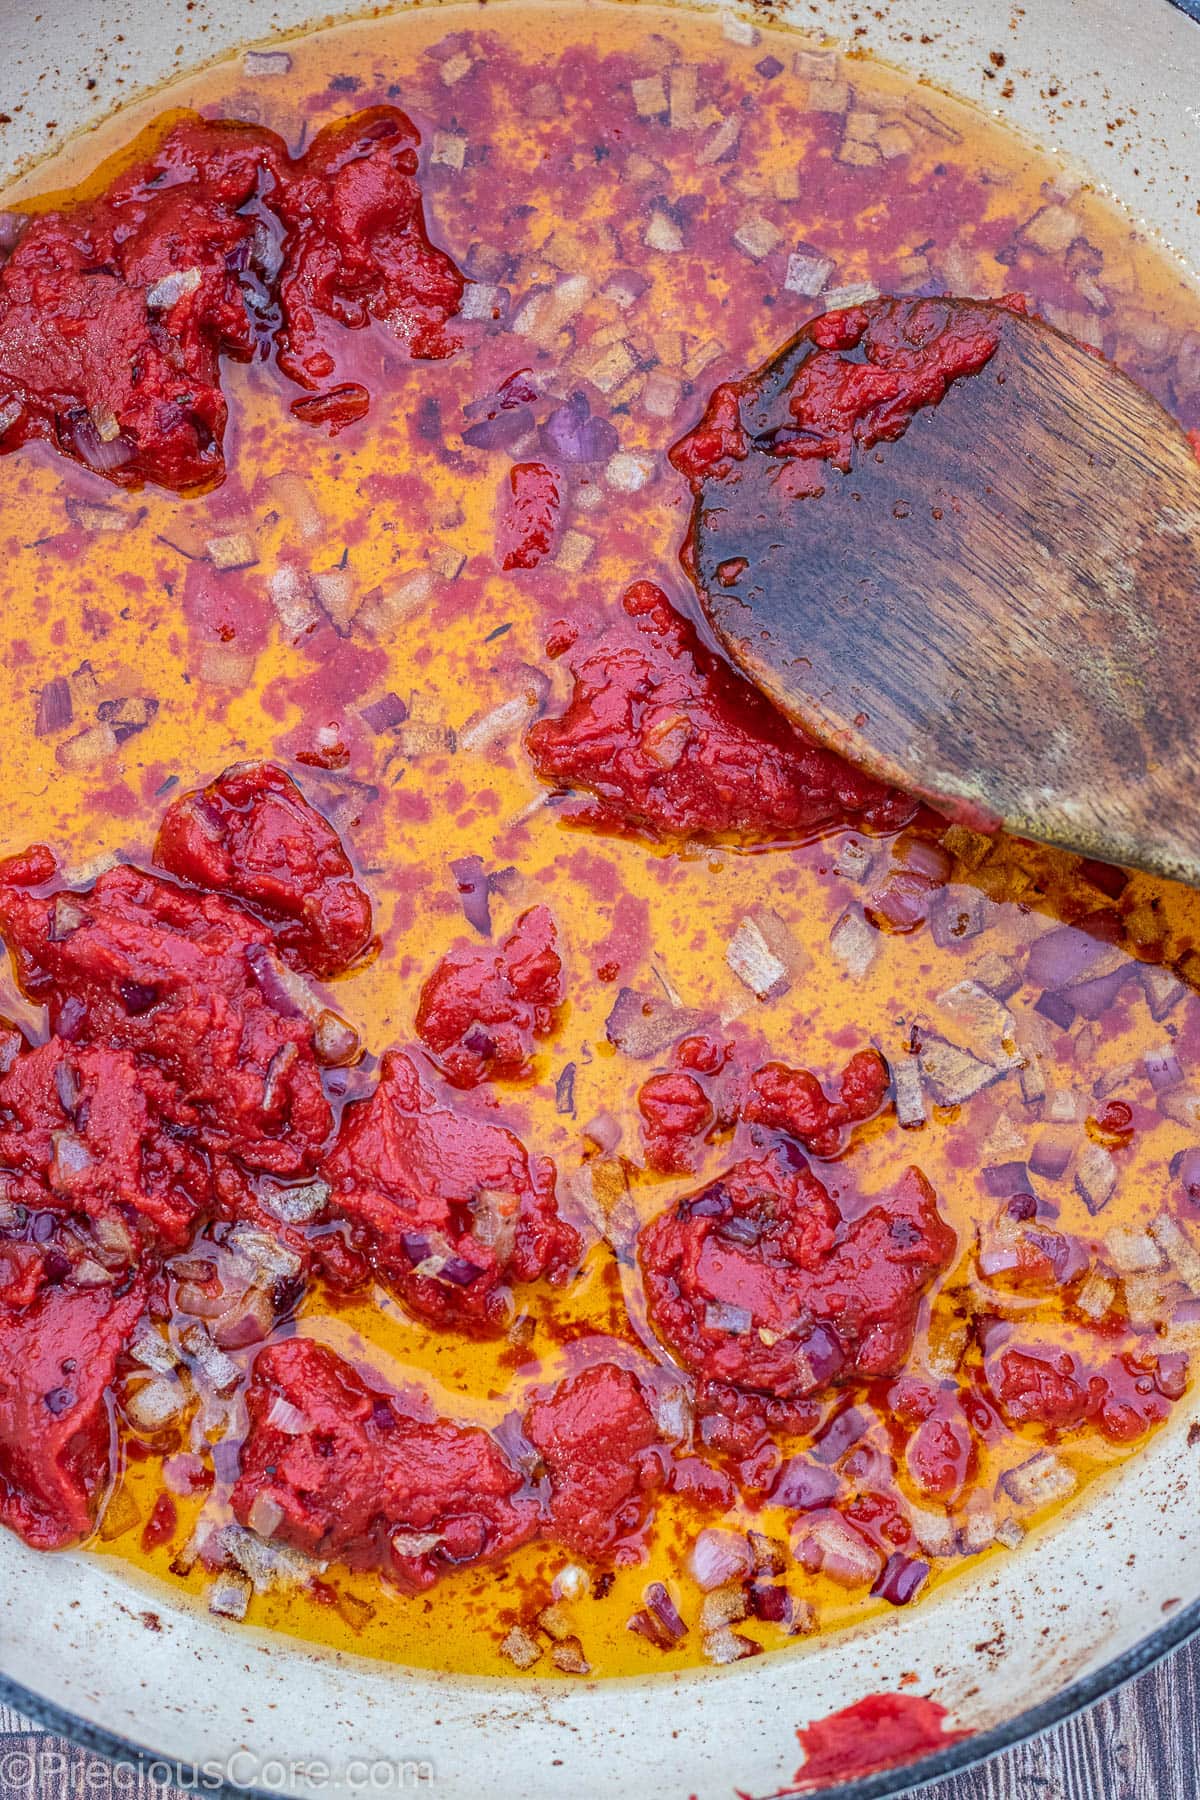 Diced onions and tomato paste cooking in oil.